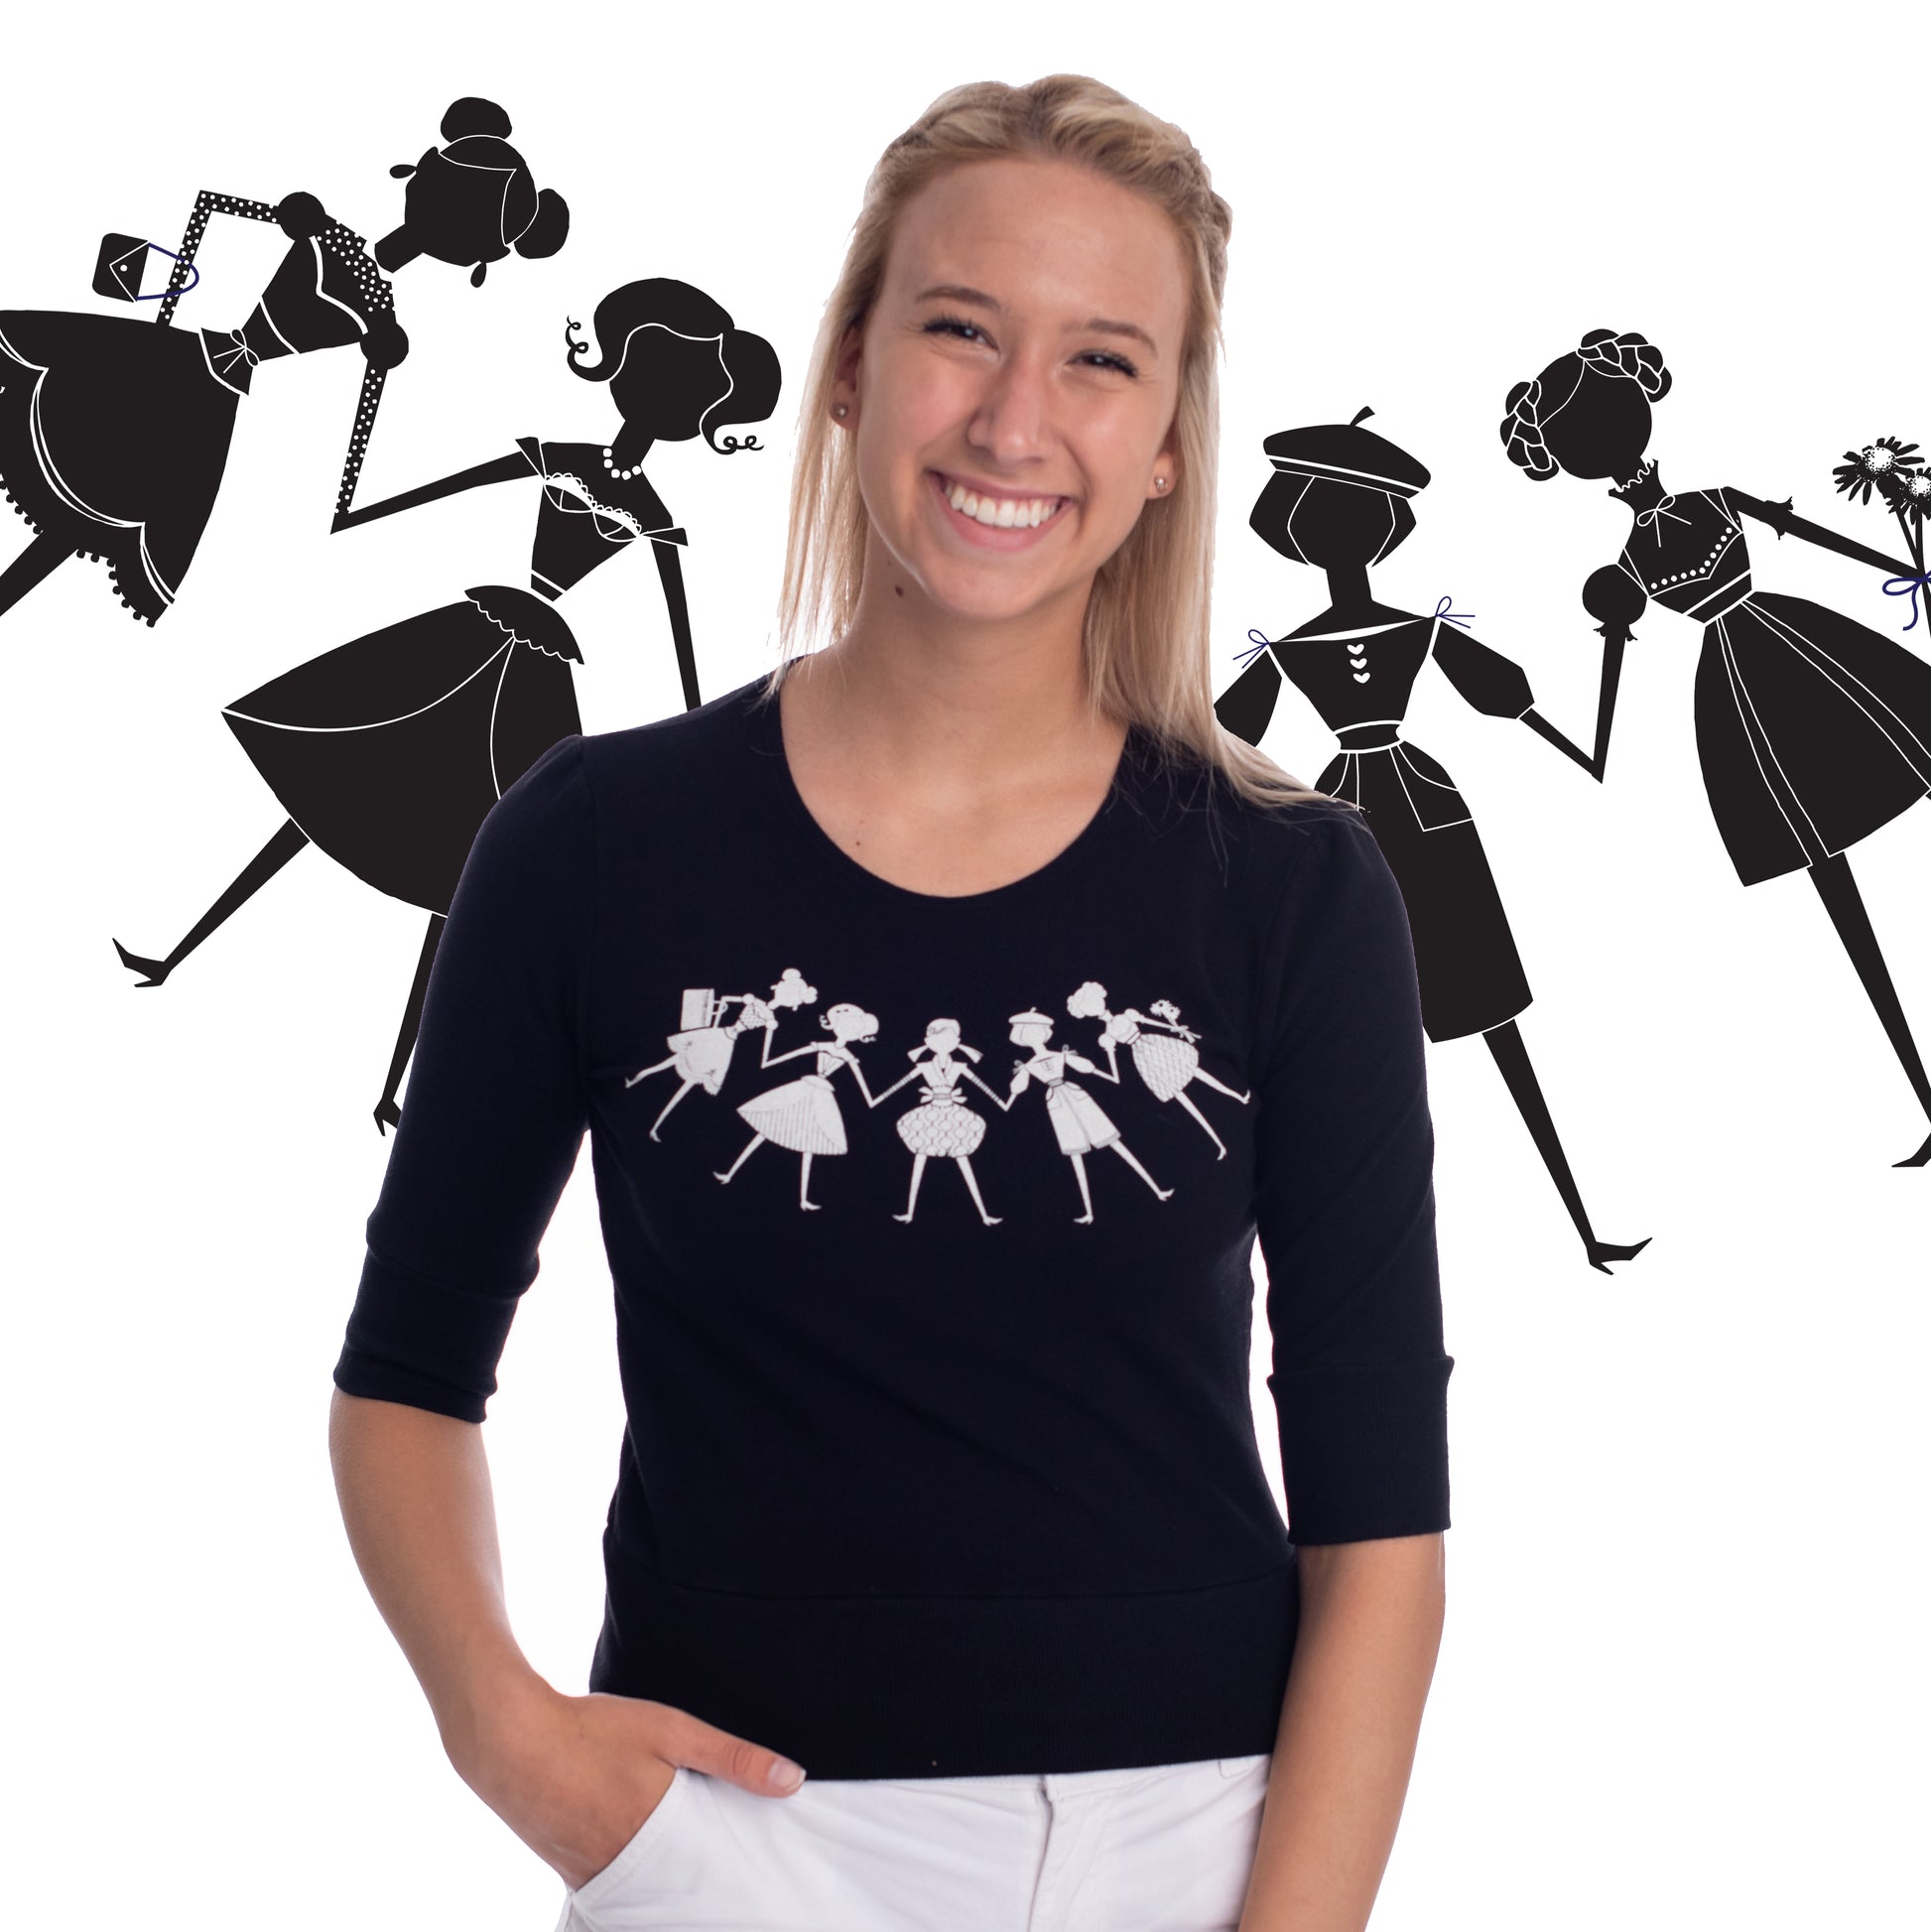 Black French terry cropped shirt featuring white paper dolls print on model with paper doll print backdrop